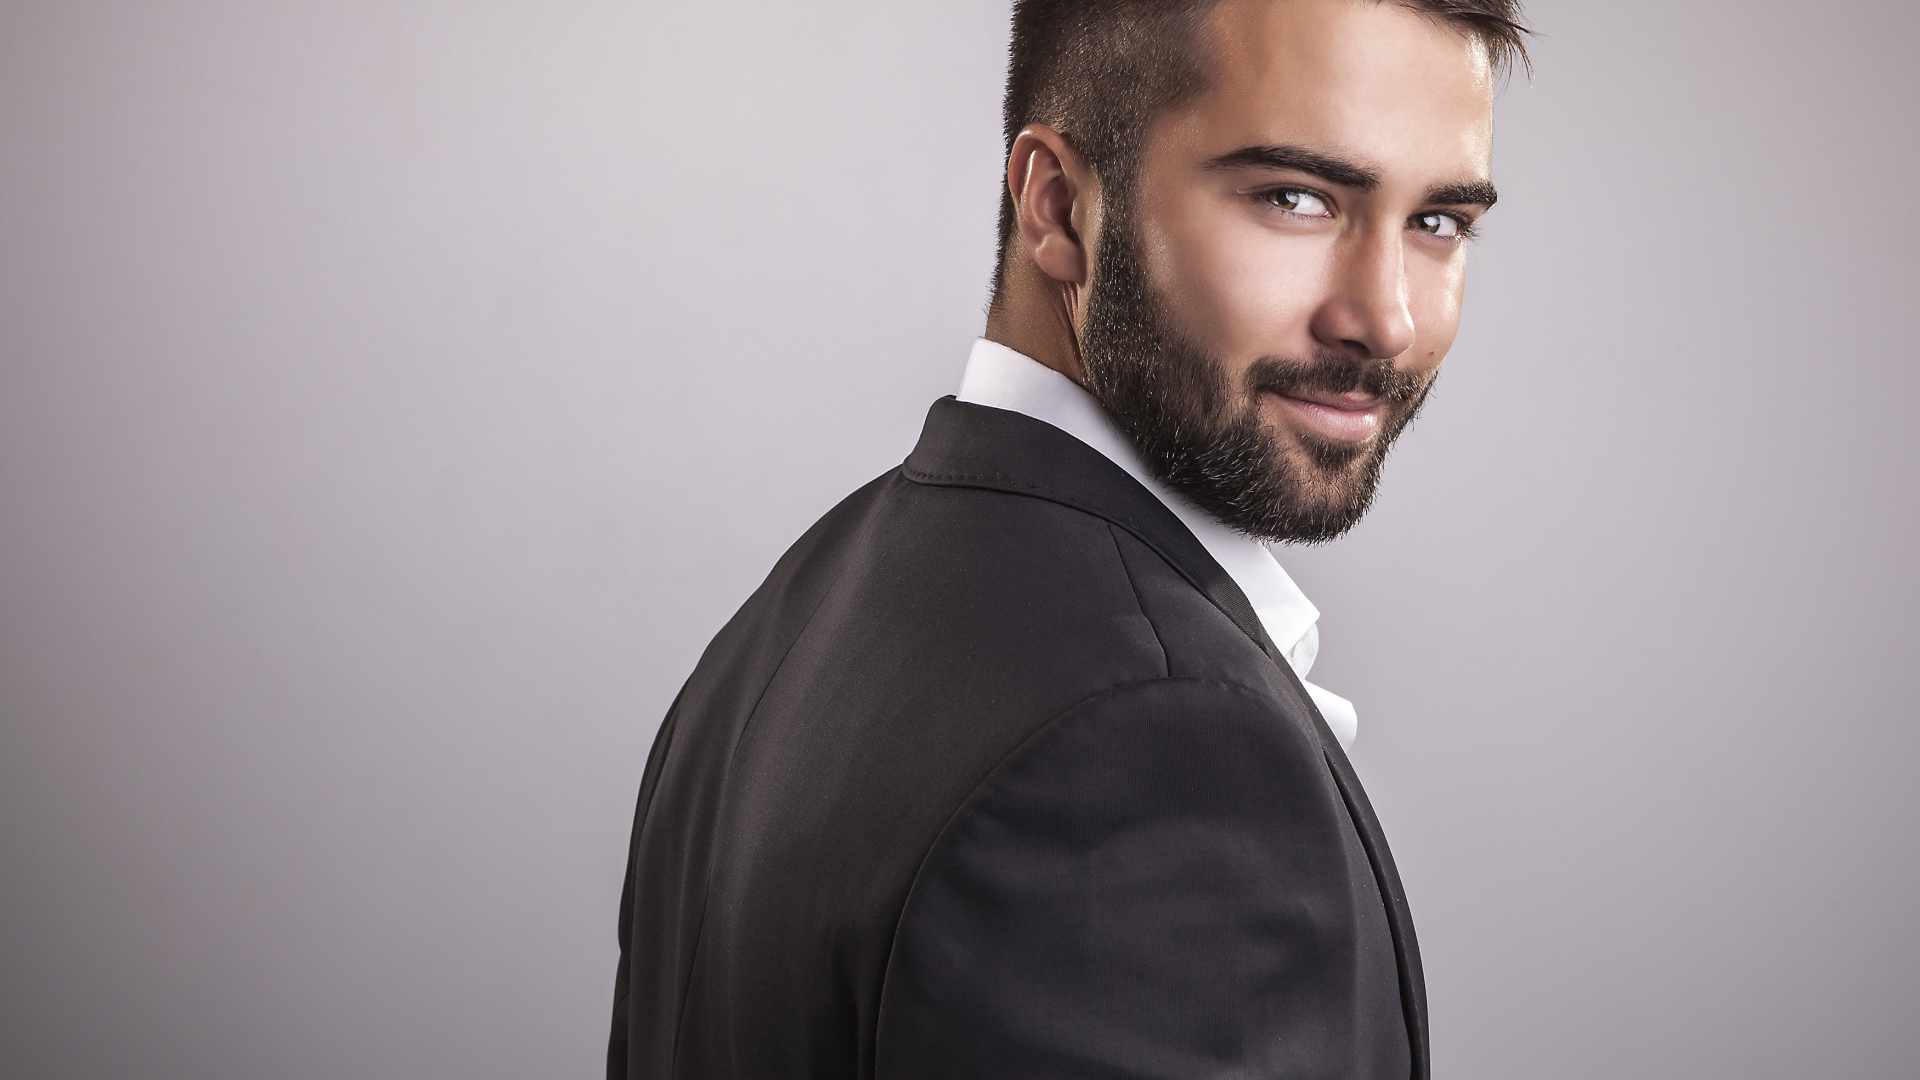 Handsome male model with a beard on gray background